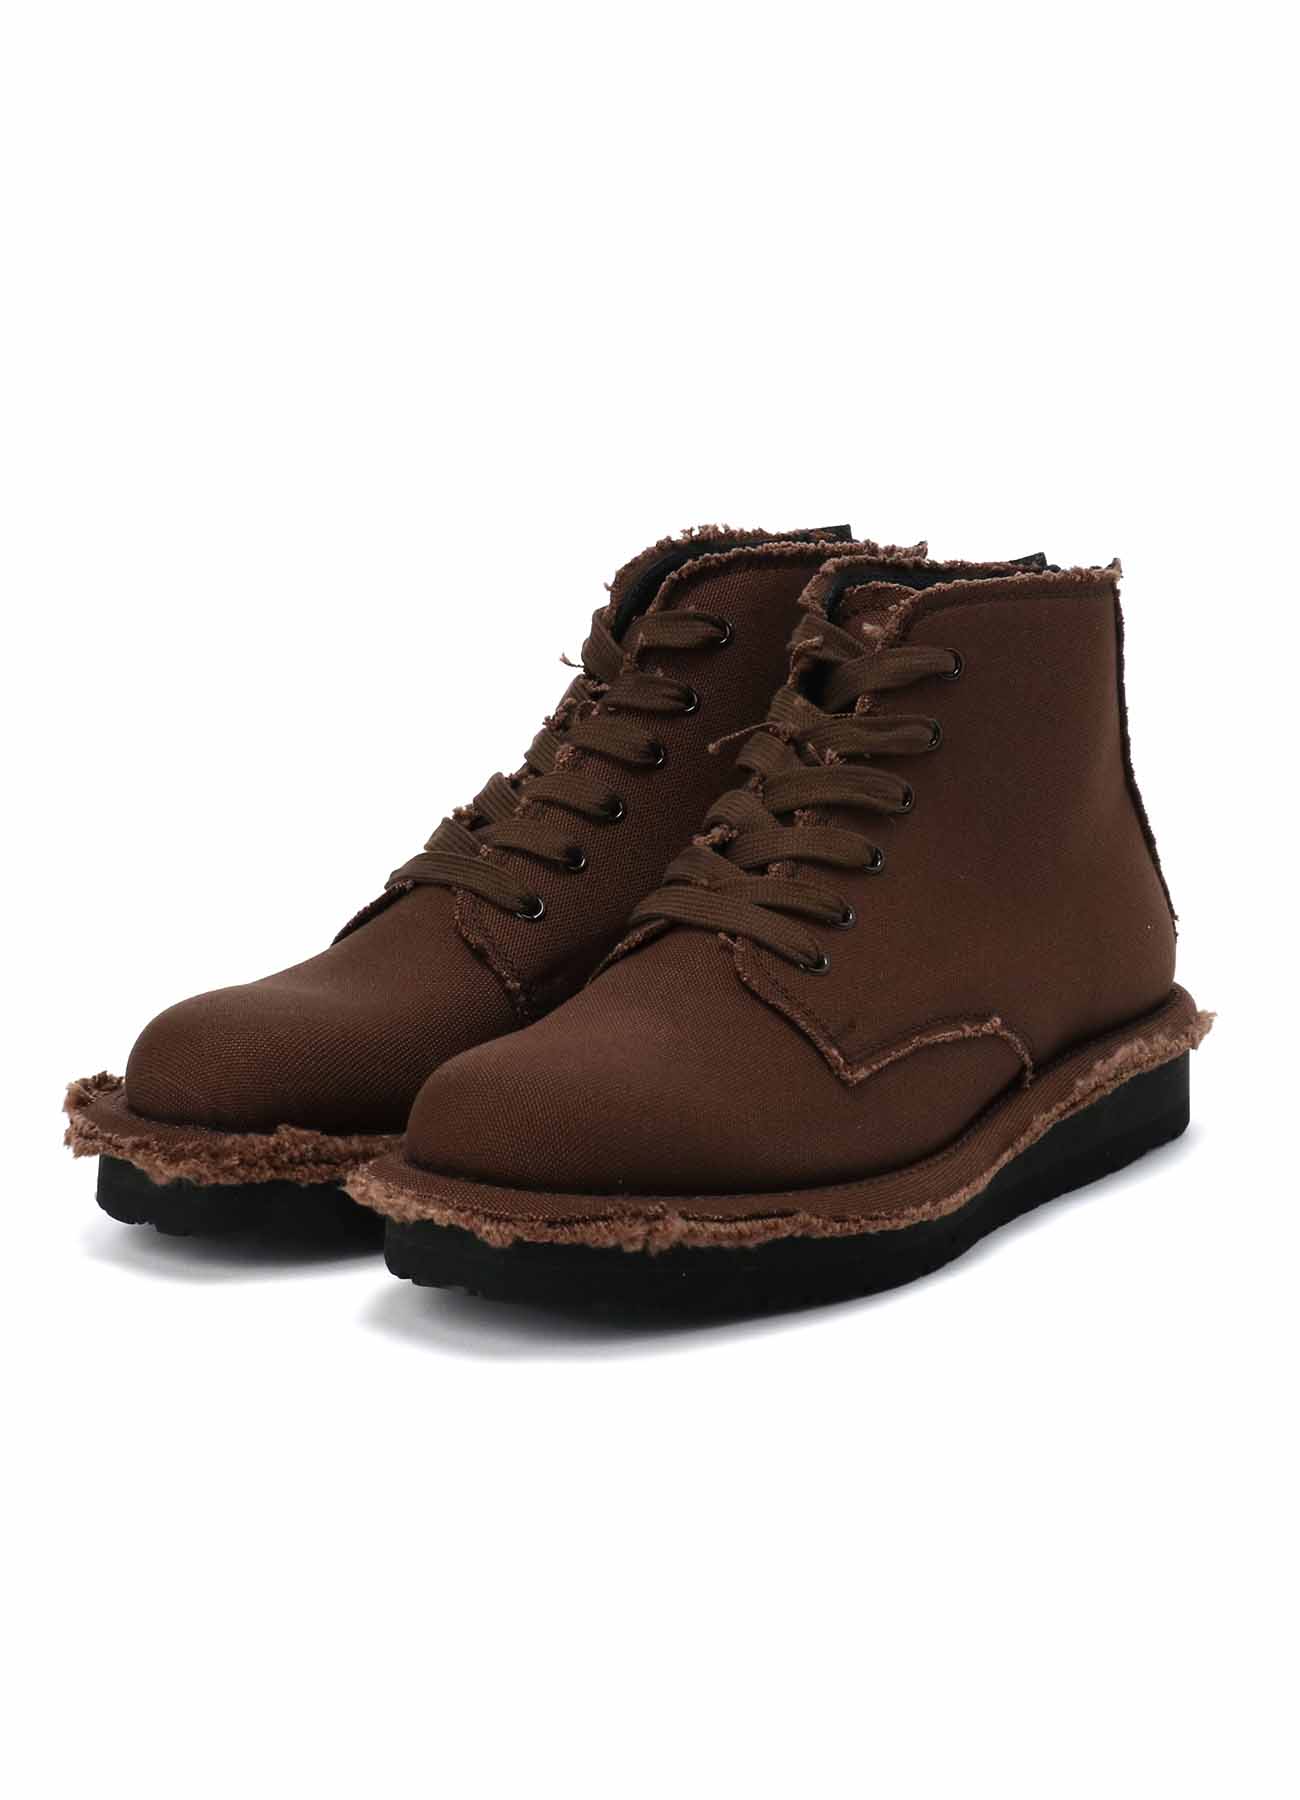 NO. 8 CANVAS LACE UP FASTENER BOOTS